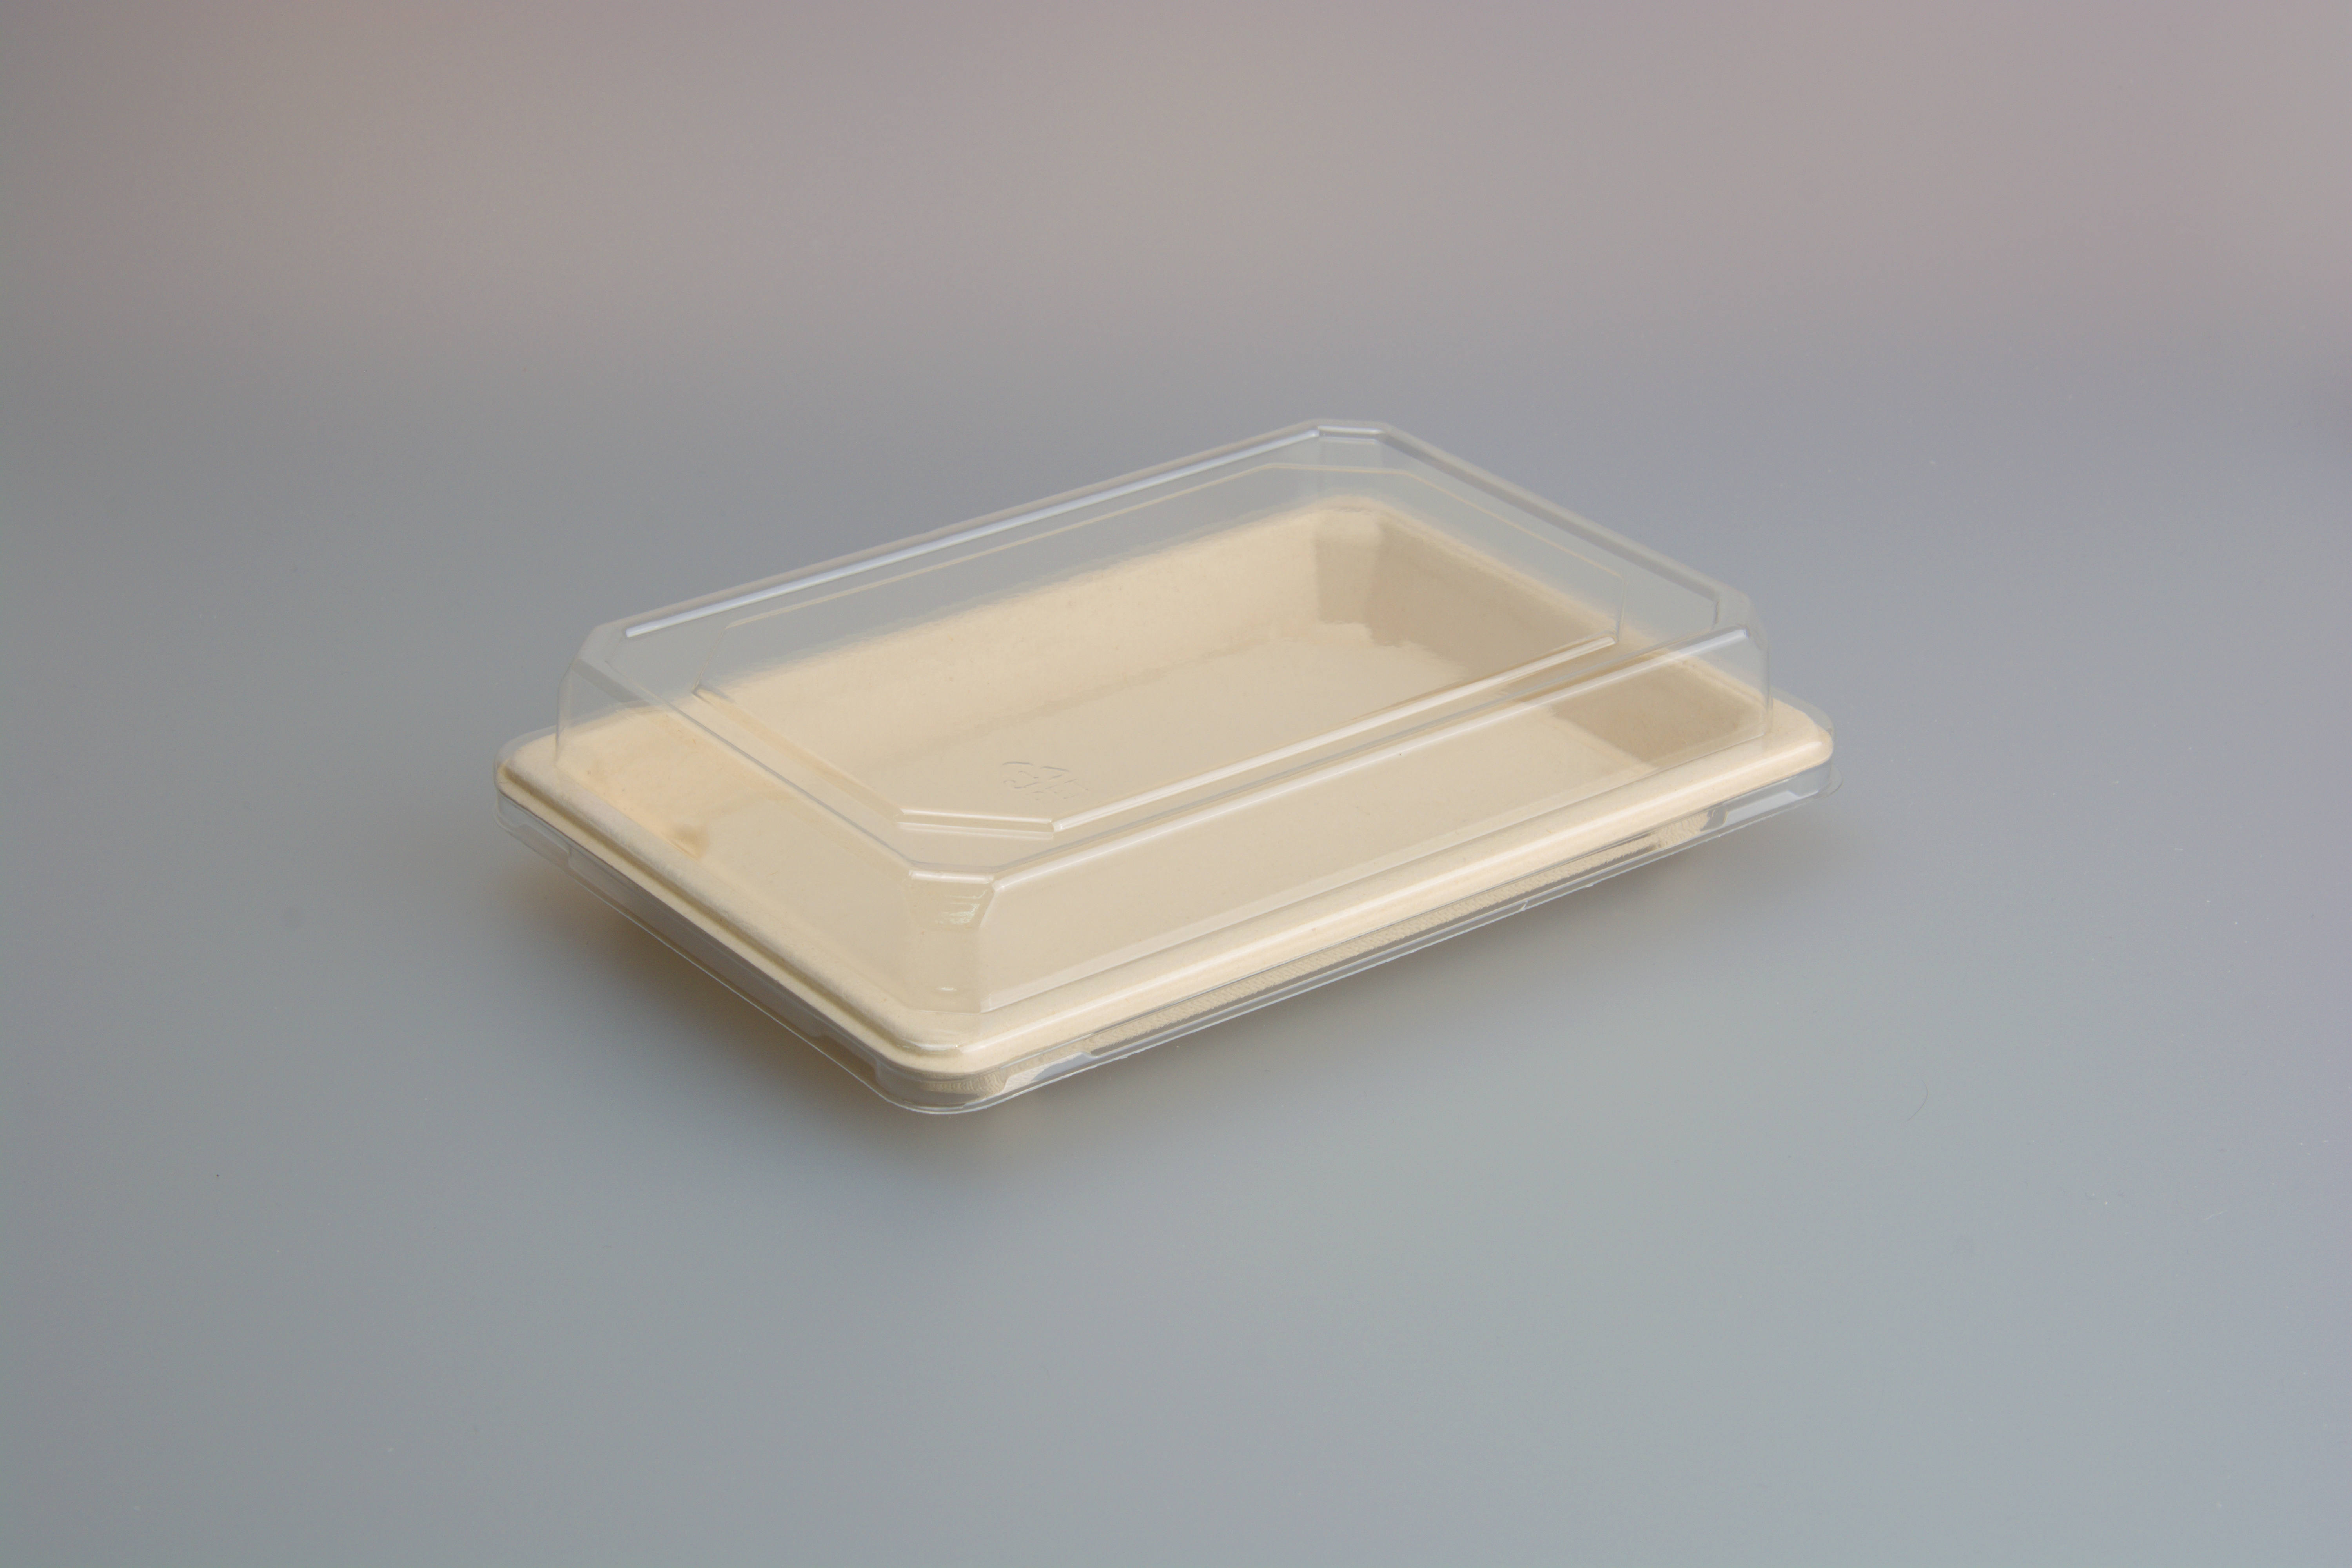 Big Discount Sugarcane Bagasse Powder - 7.3*5.0 INCH Sushi Trays, Disposable Sushi Containers With Lids – Short, Take Out Containers For Appetizers, Entrees, or Desserts, Black Plastic To Go...